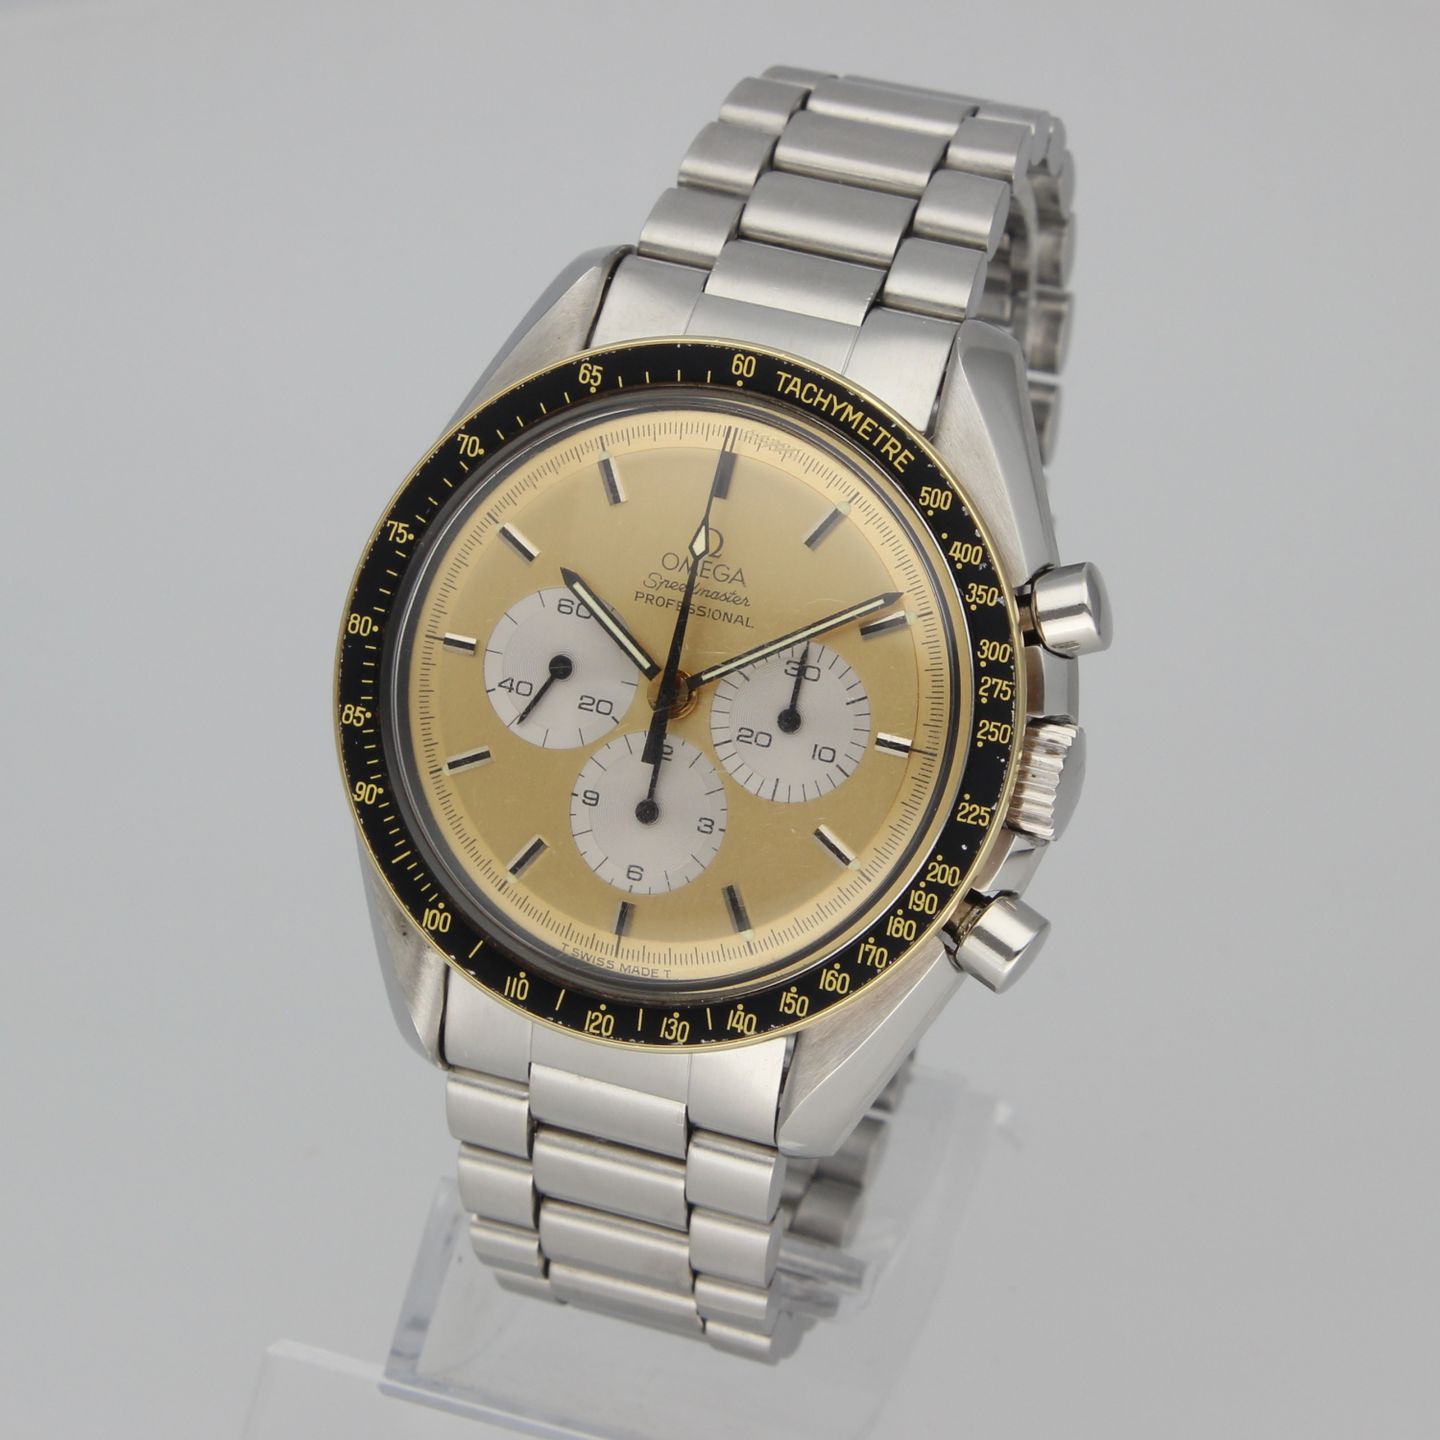 Omega Speedmaster Professional Moonwatch DD 145.0022 CHAMP (1985) - Champagne dial 42 mm Steel case (3/8)